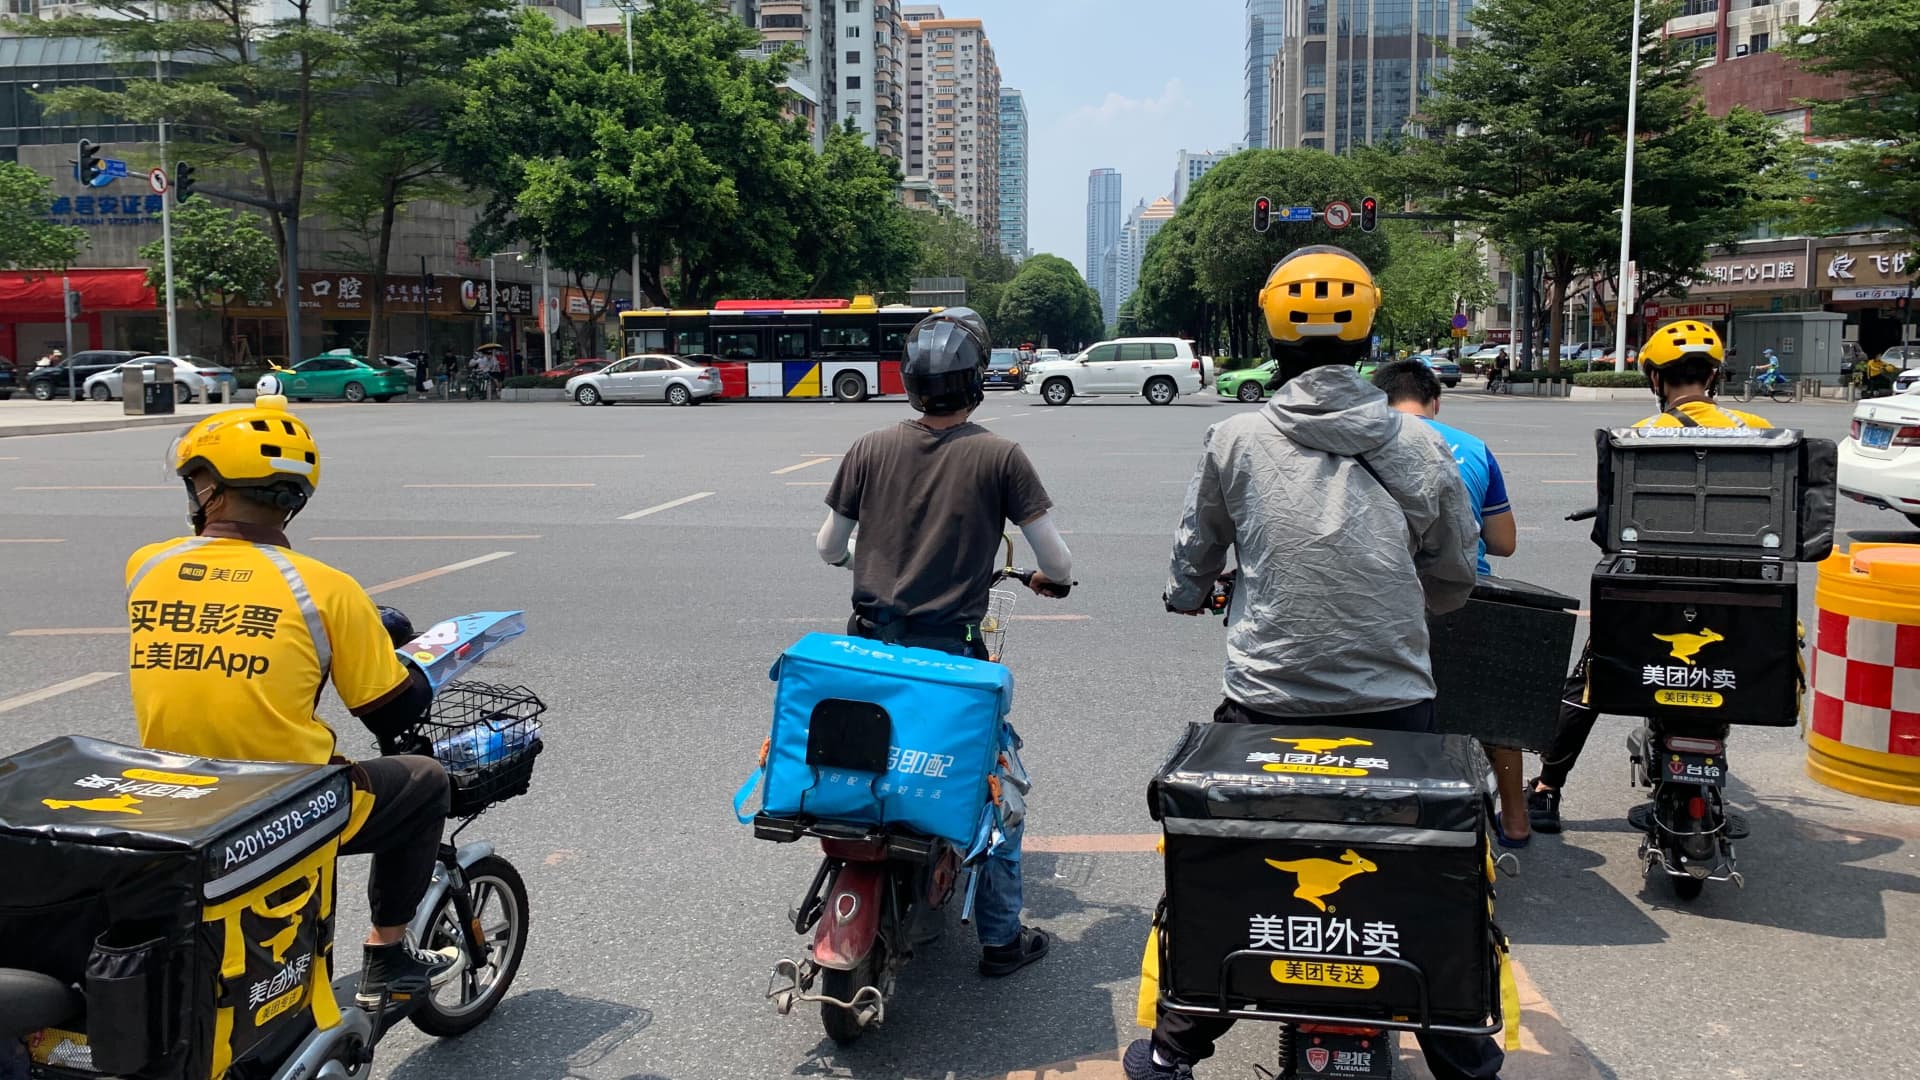 Drivers for Meituan and Alibaba-owned Ele.me en route to delivering items to customers in Guangzhou, China.